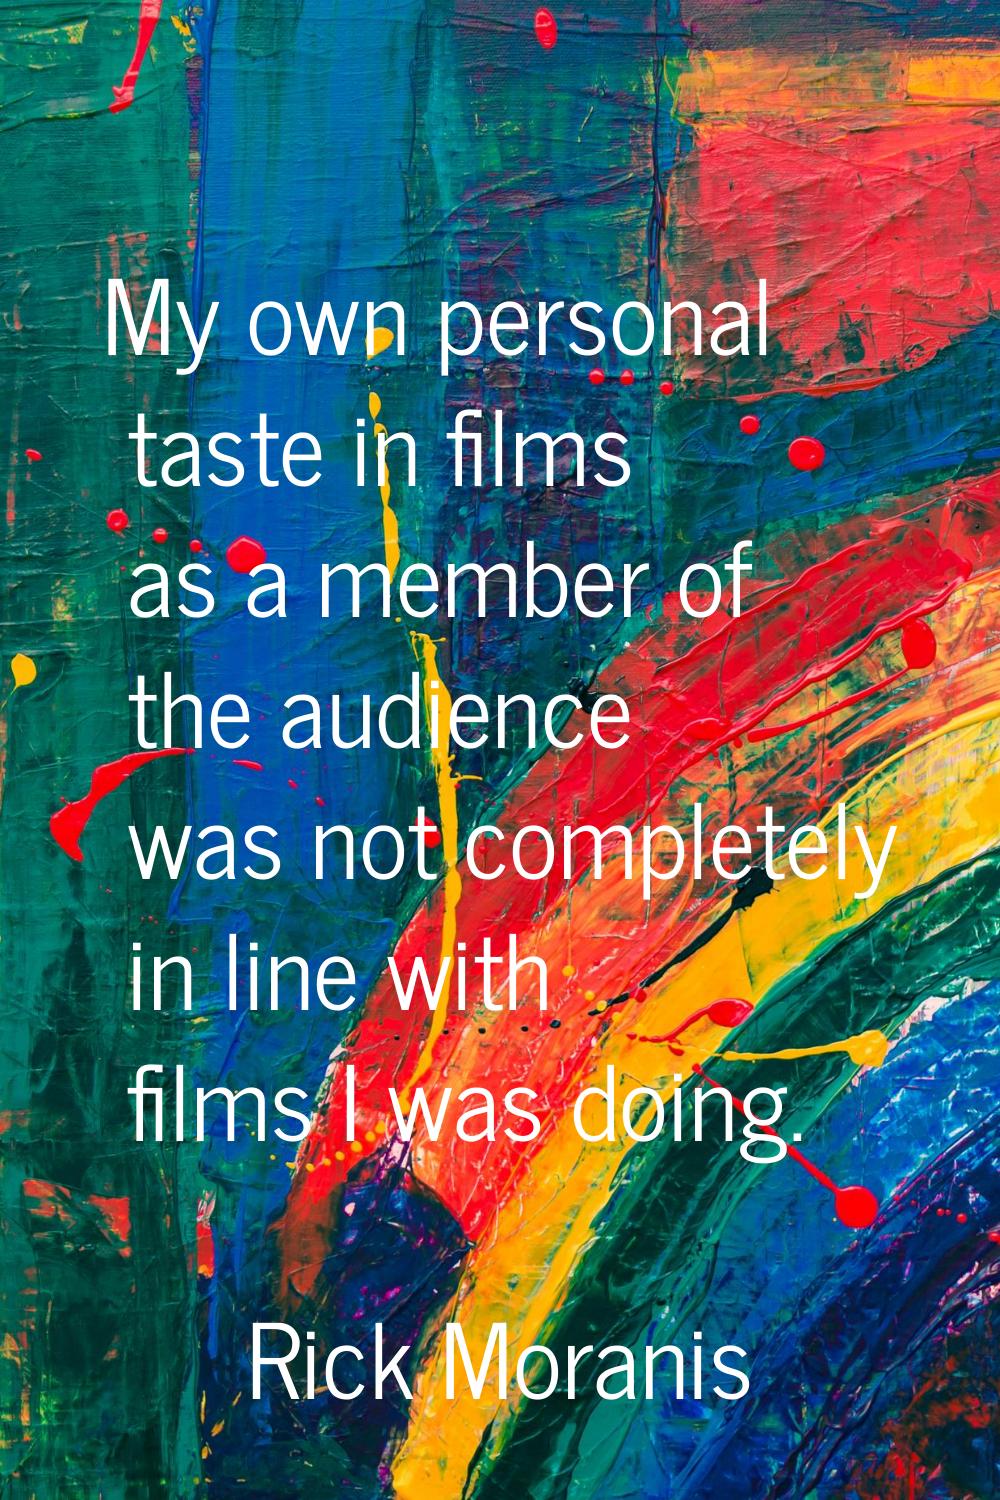 My own personal taste in films as a member of the audience was not completely in line with films I 